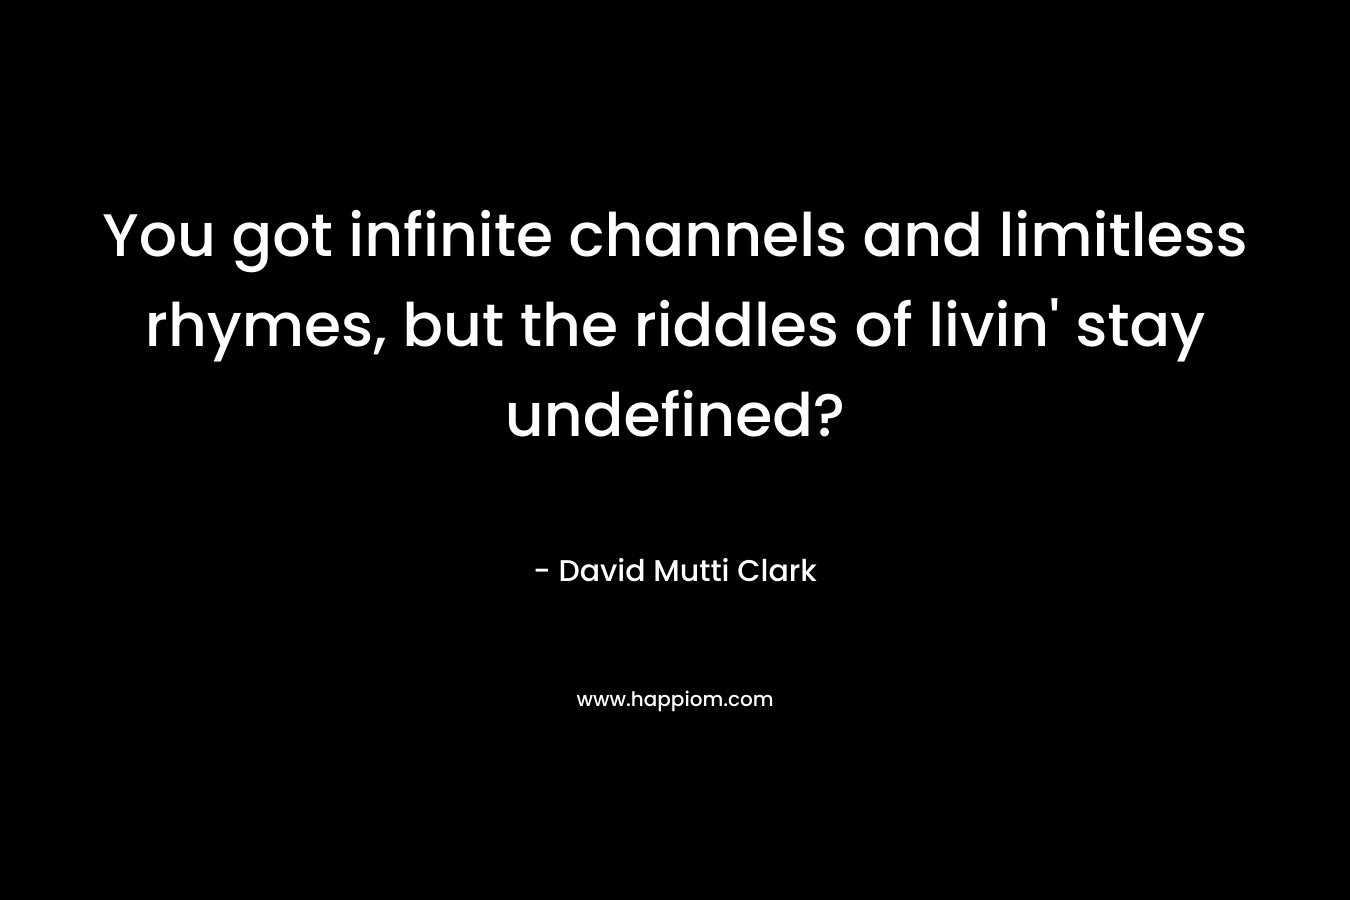 You got infinite channels and limitless rhymes, but the riddles of livin’ stay undefined? – David Mutti Clark